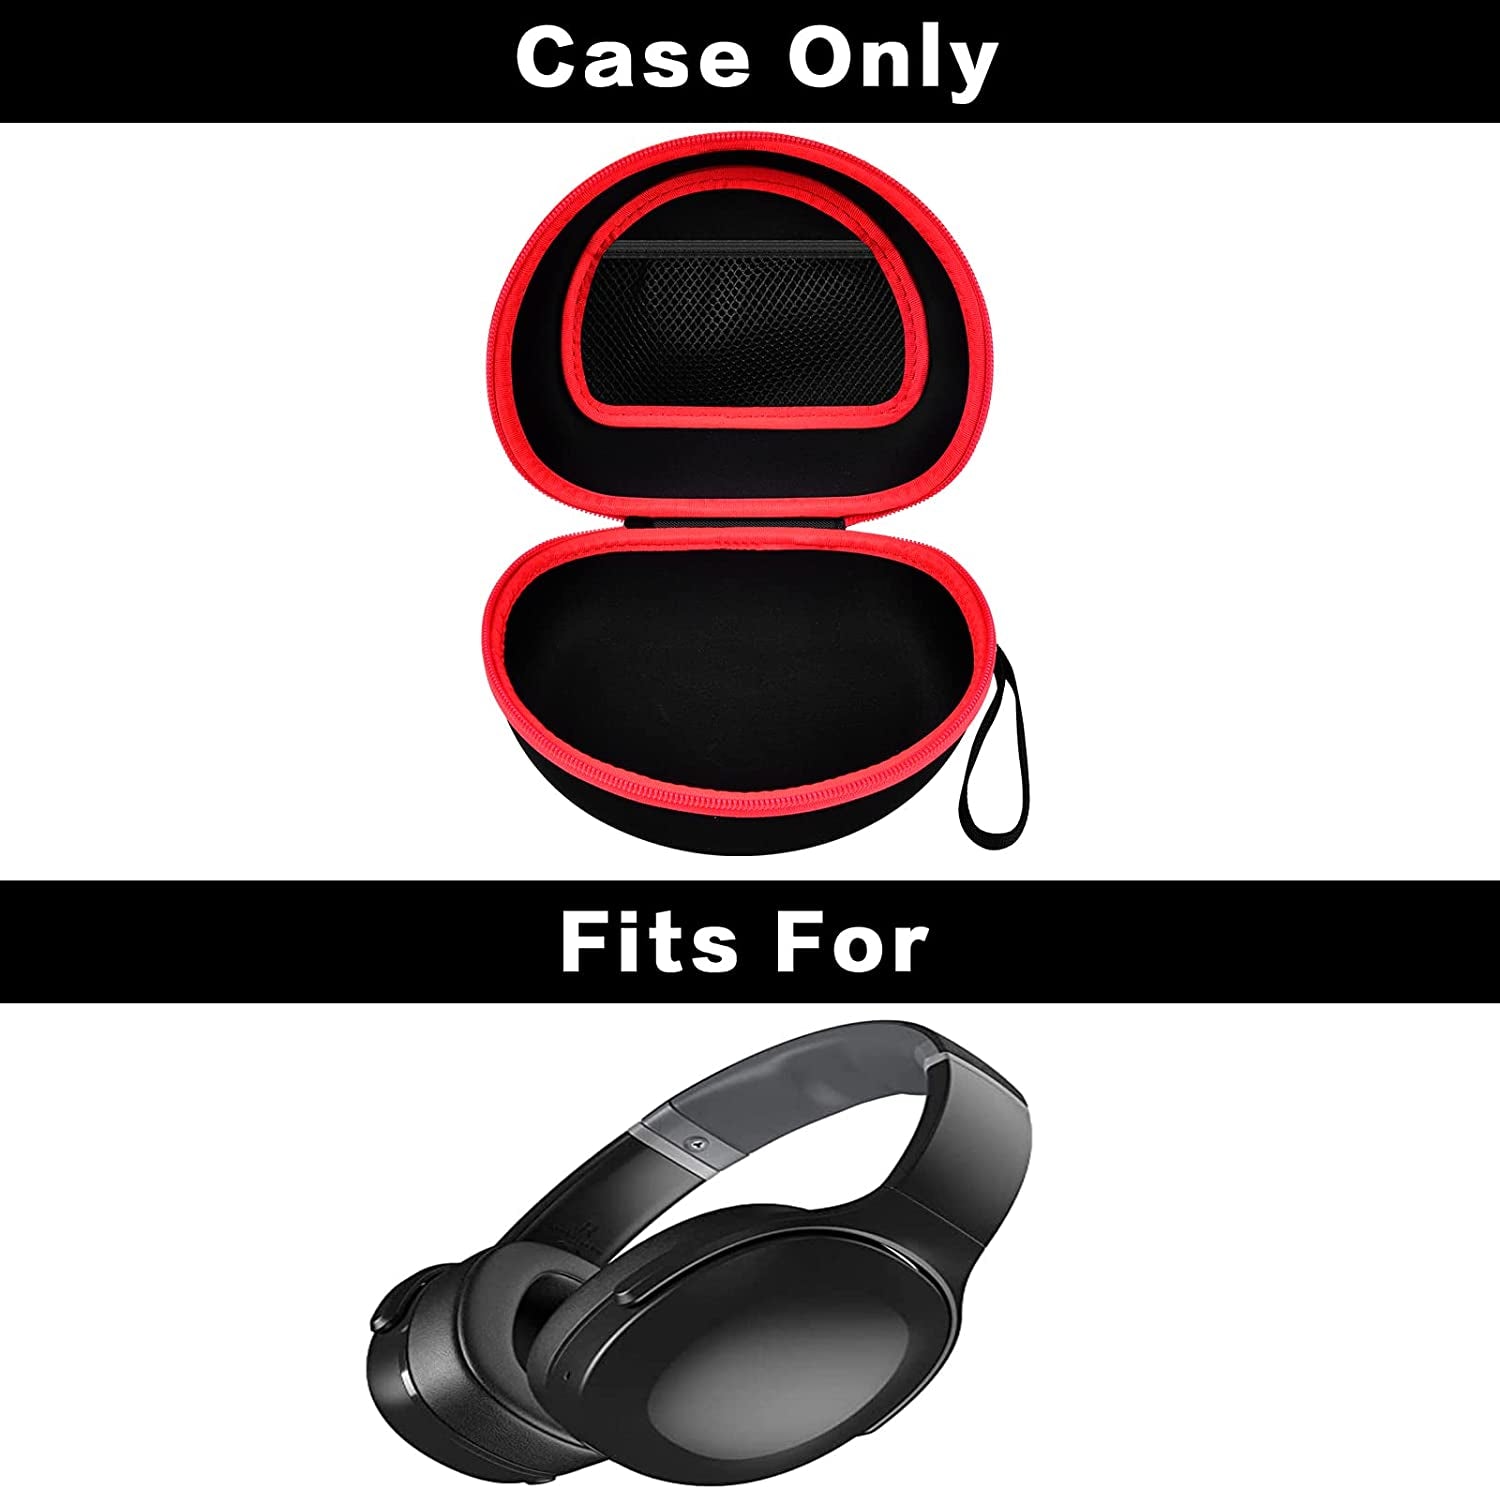 Headphone Case Compatible with Skullcandy Crusher/Hesh/Evo Wireless Over-Ear Bluetooth Headphones and More Foldable Headset Earphones, Hard Shell Earphone Protector Organizer Bag Pouch - Box Only